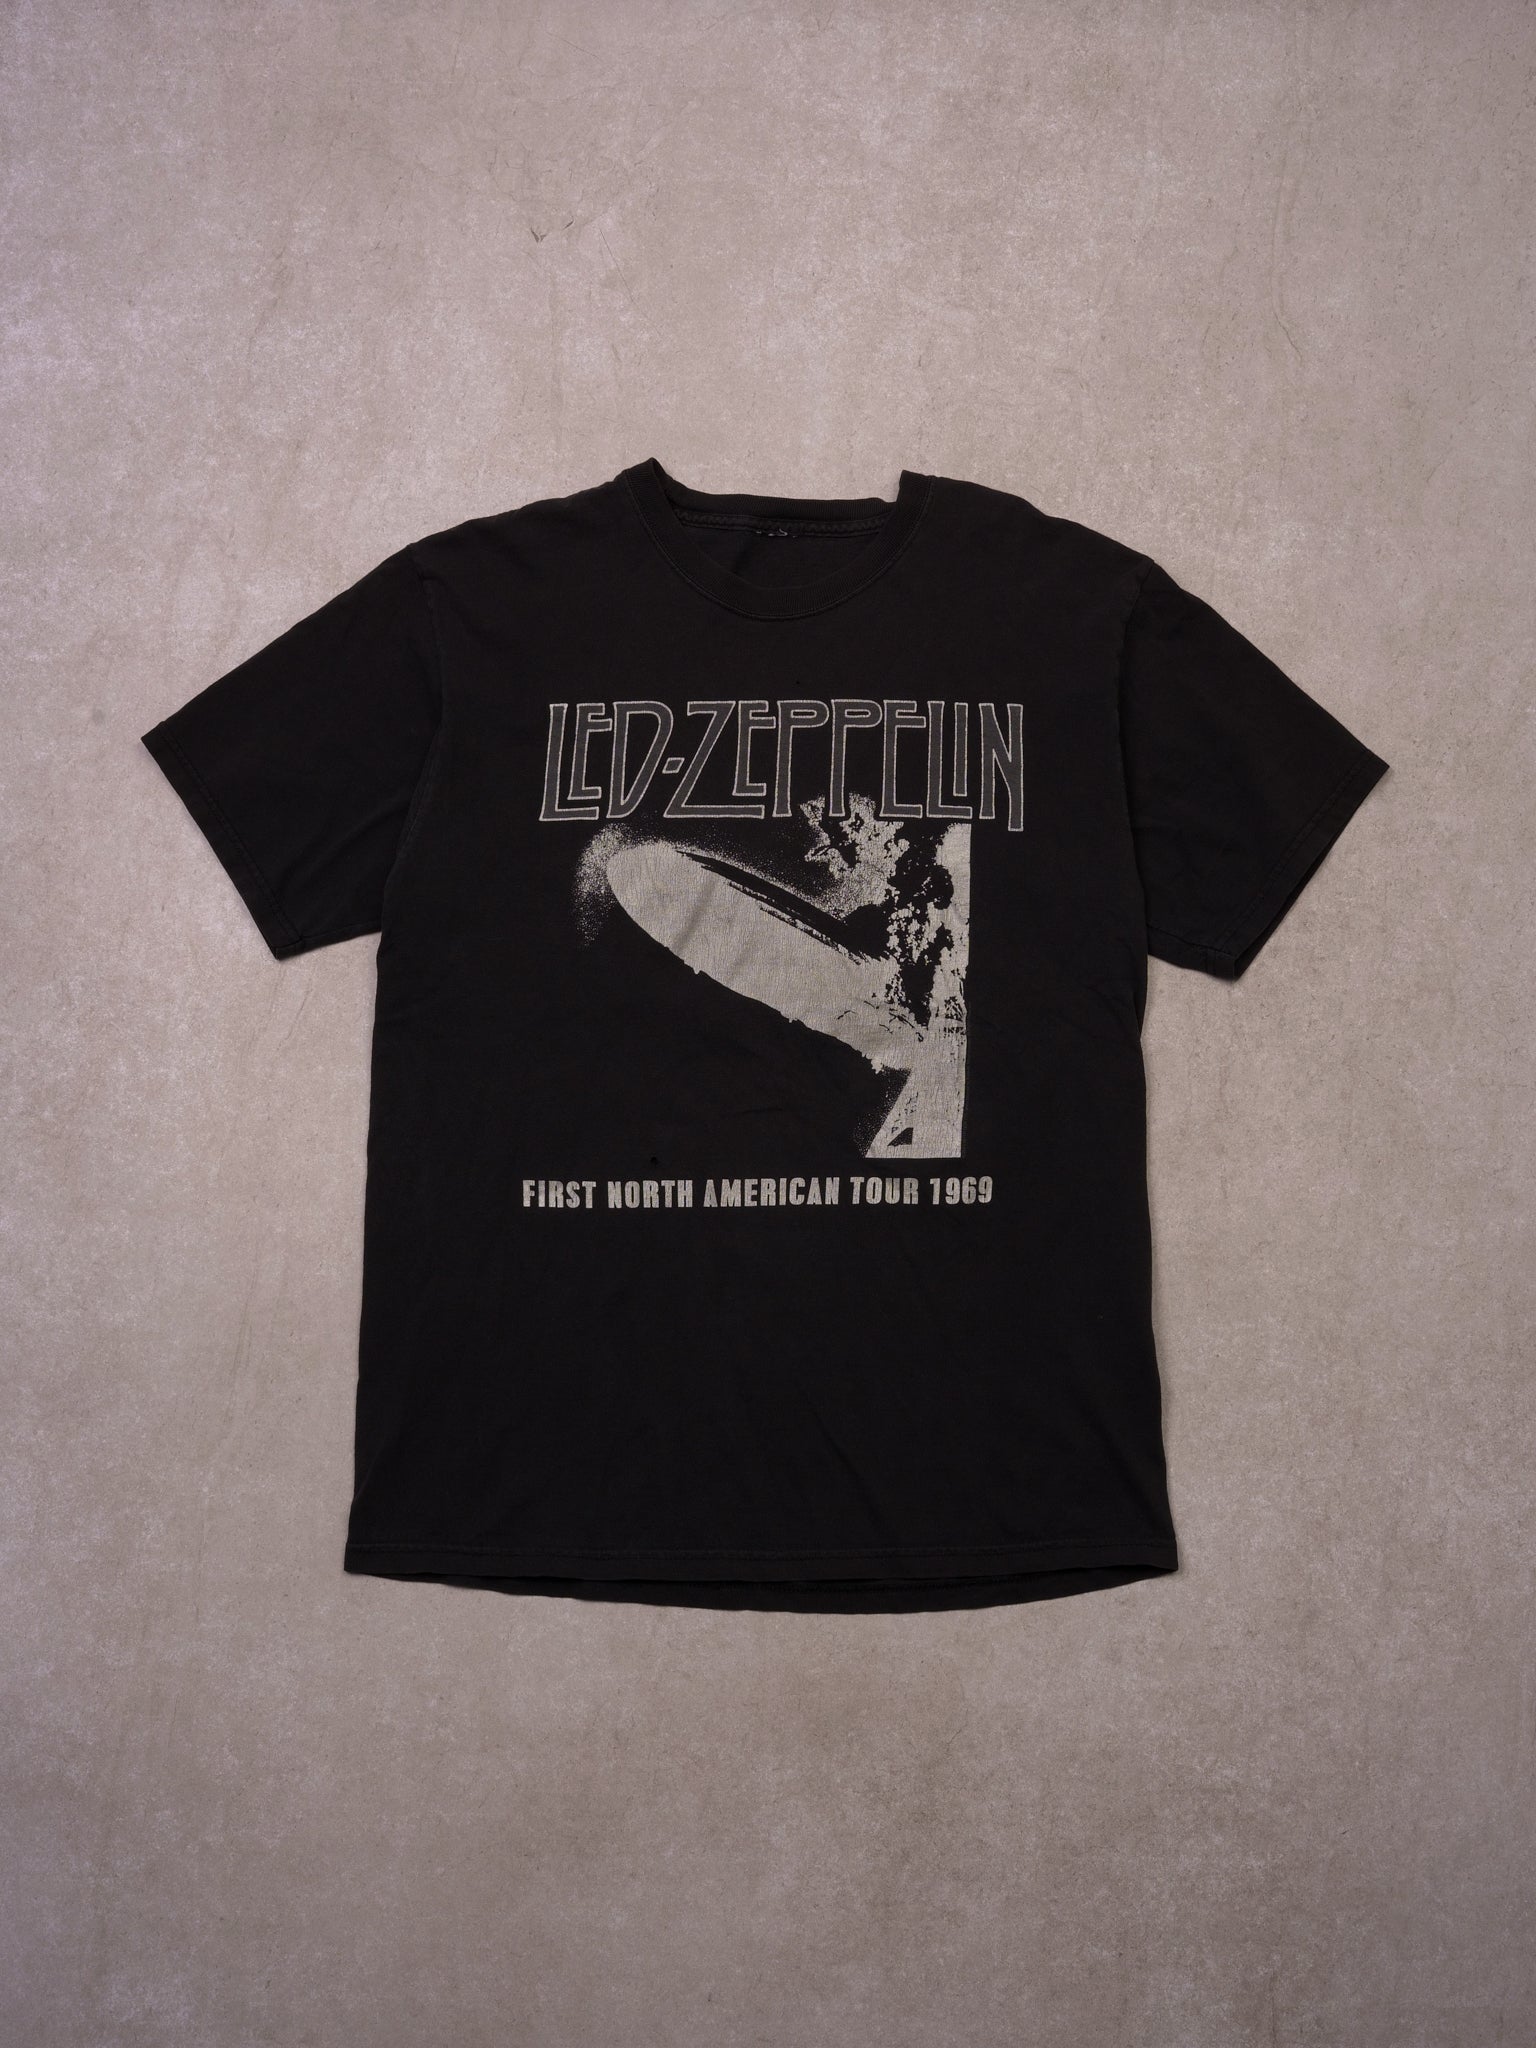 Vintage Black Led Zeppelin North American Tour Graphic Tee (S)